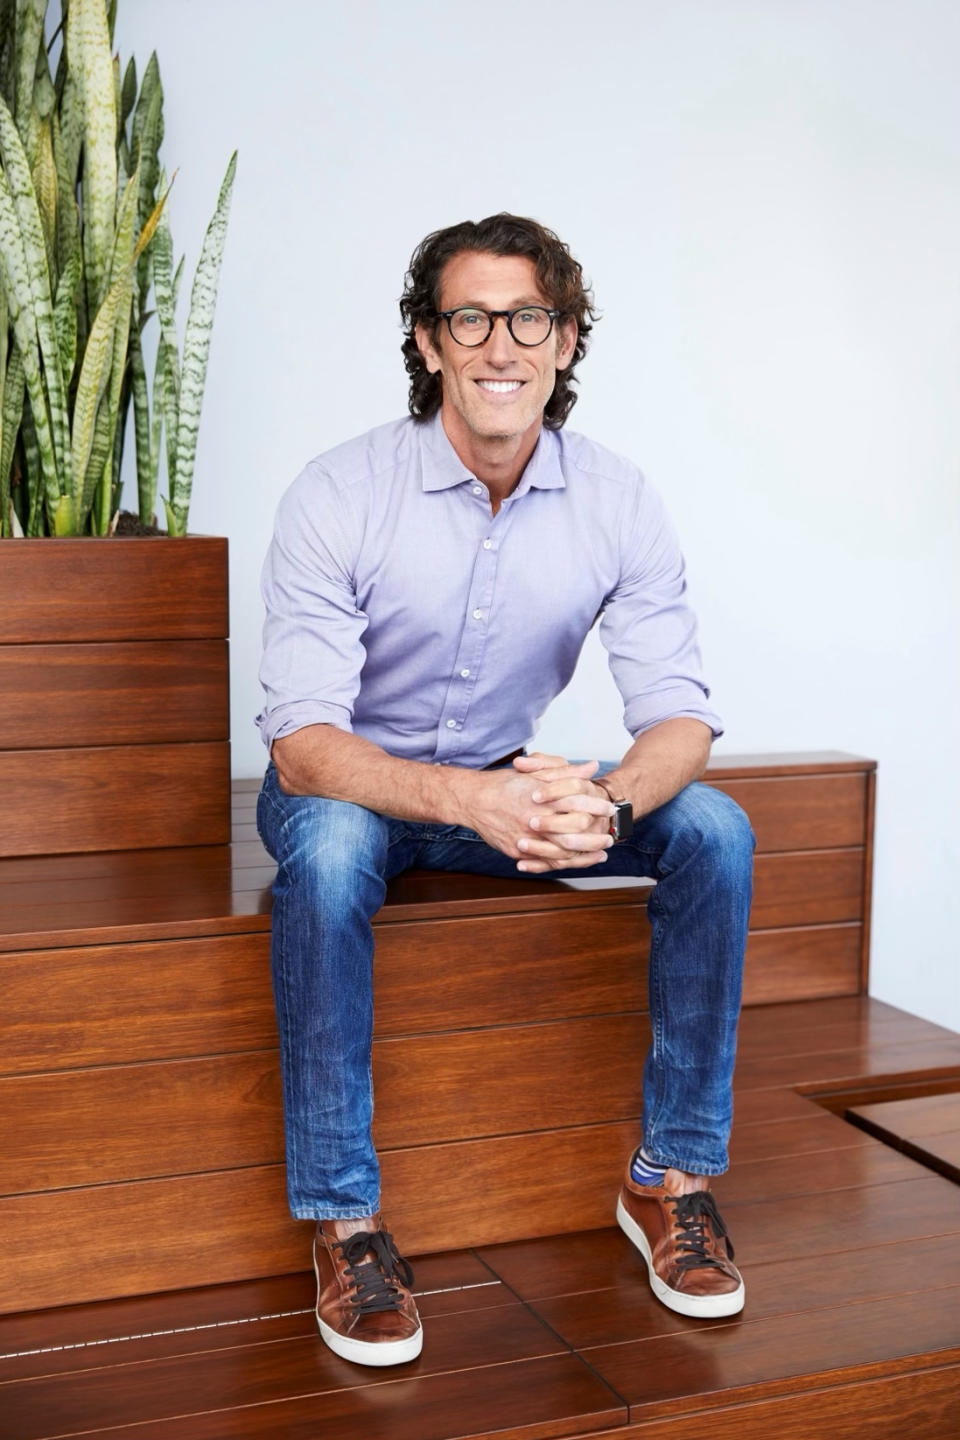 Richard Dickson will become president and chief executive officer of Gap Inc.